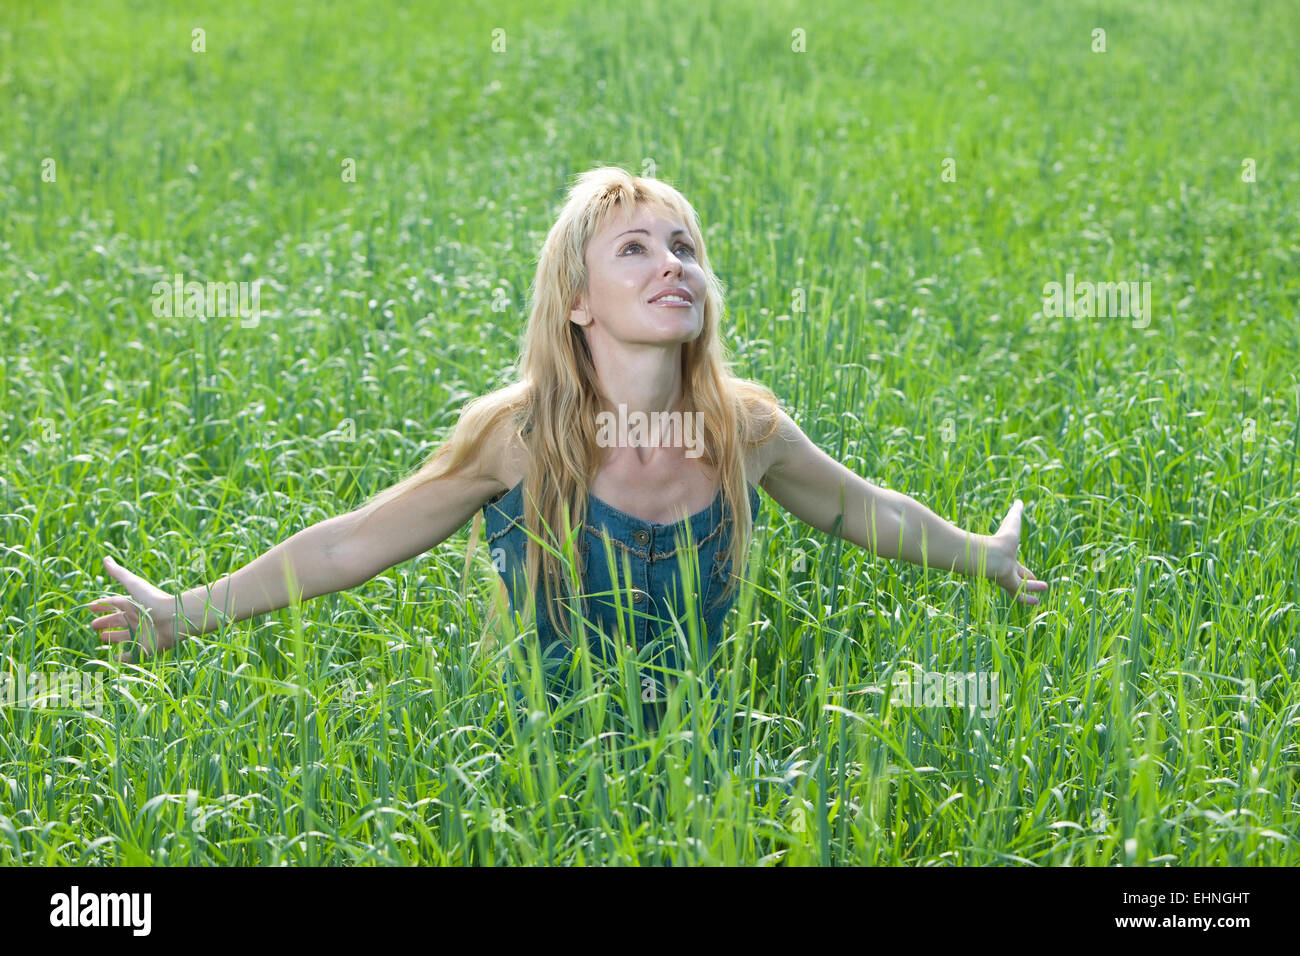 The happy young woman in the field Stock Photo